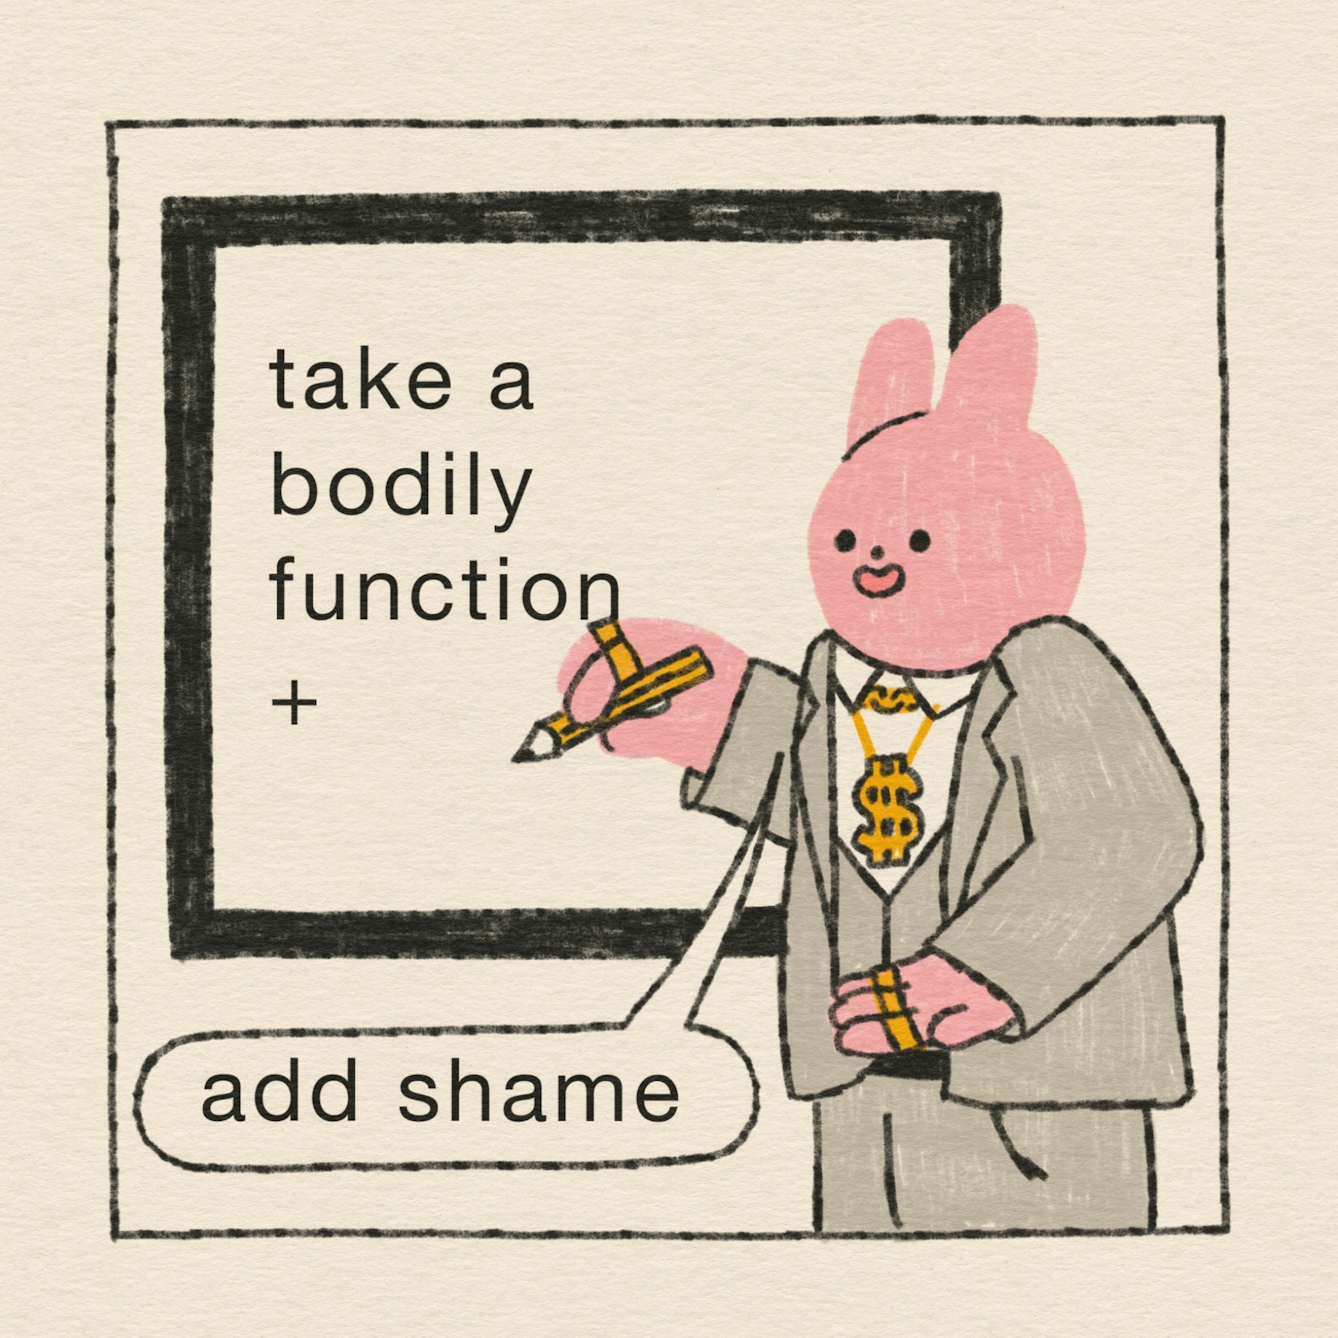 Panel 3 of 4: “And add shame,” says the CEO. 